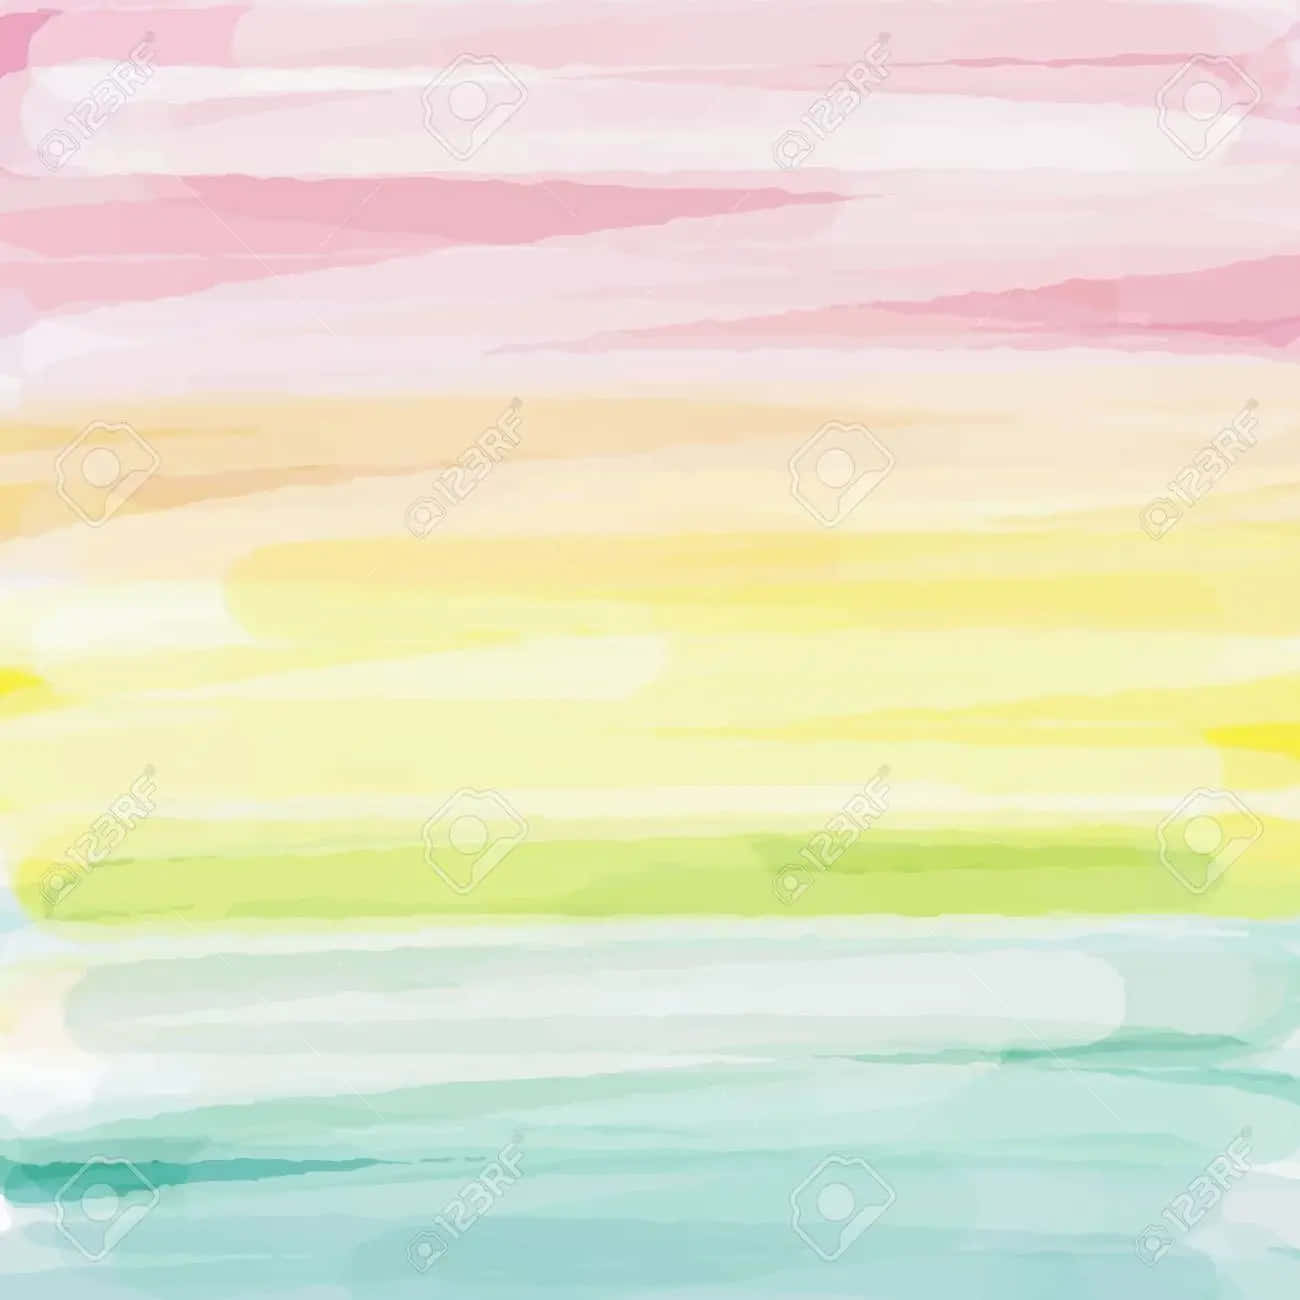 Bright Pink, Yellow and Blue Colors Wallpaper